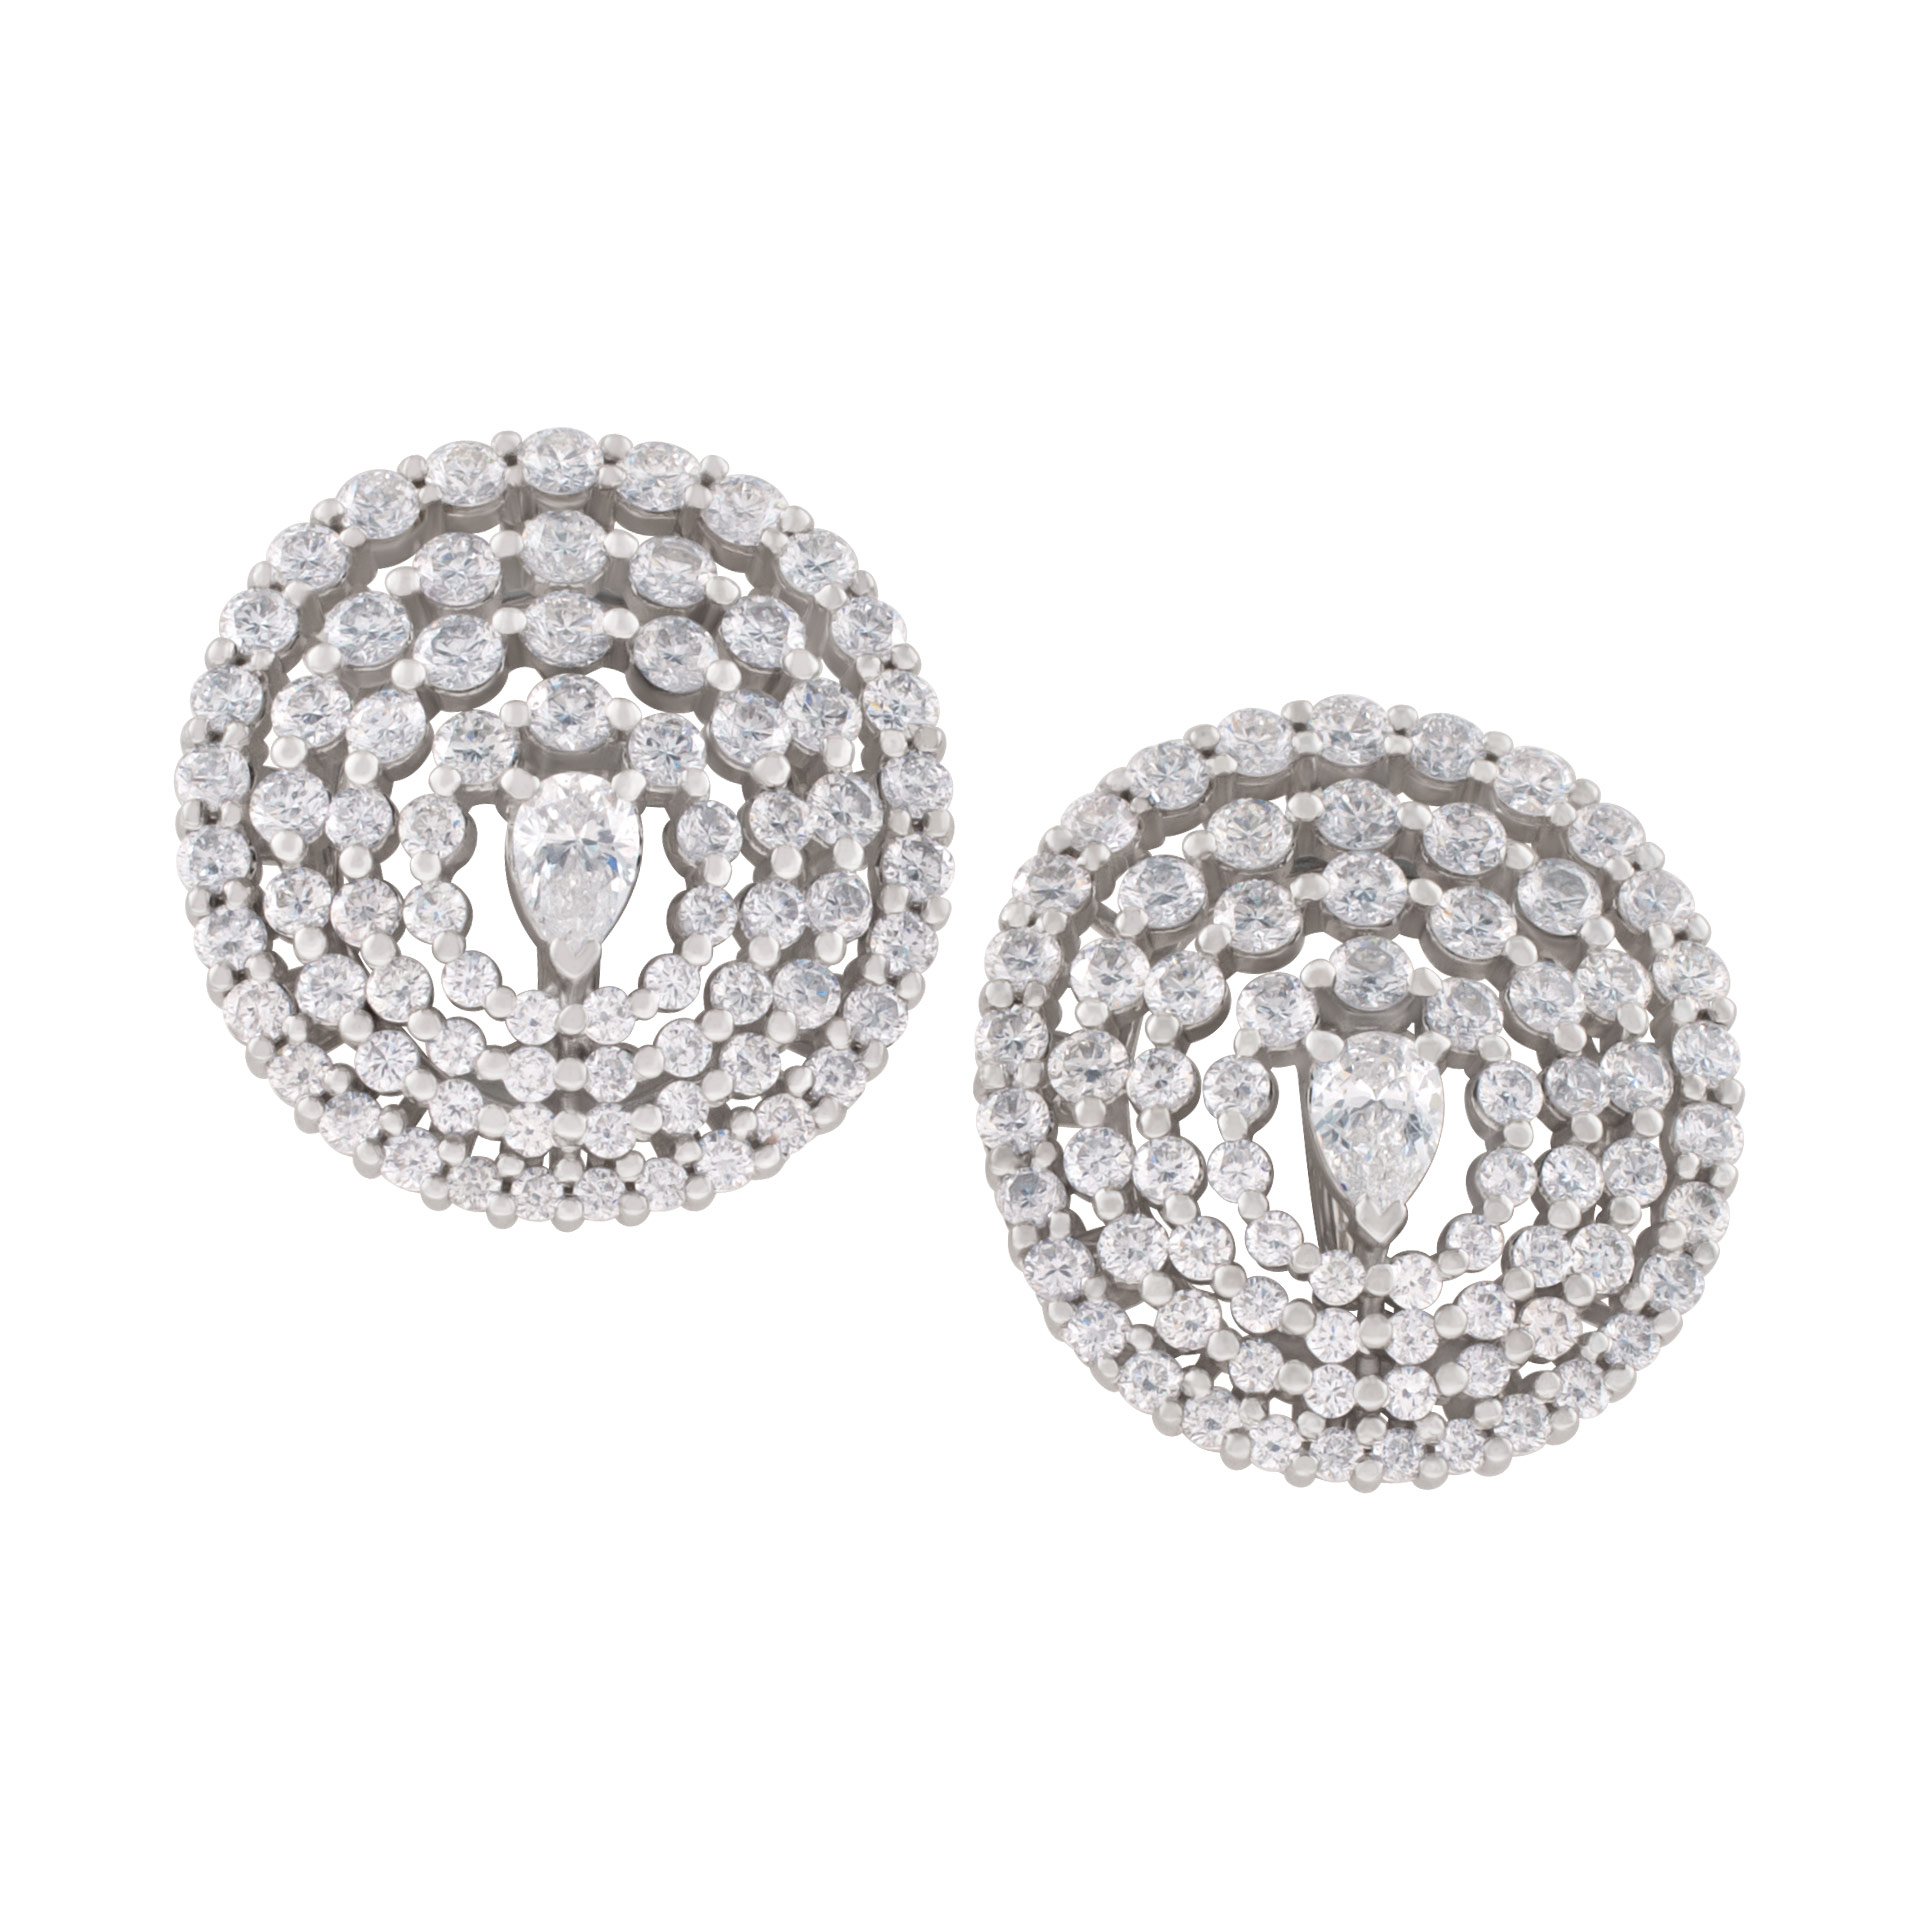 Diamond earrings in 18K white gold. 2.79 carats in white clean diamonds image 1